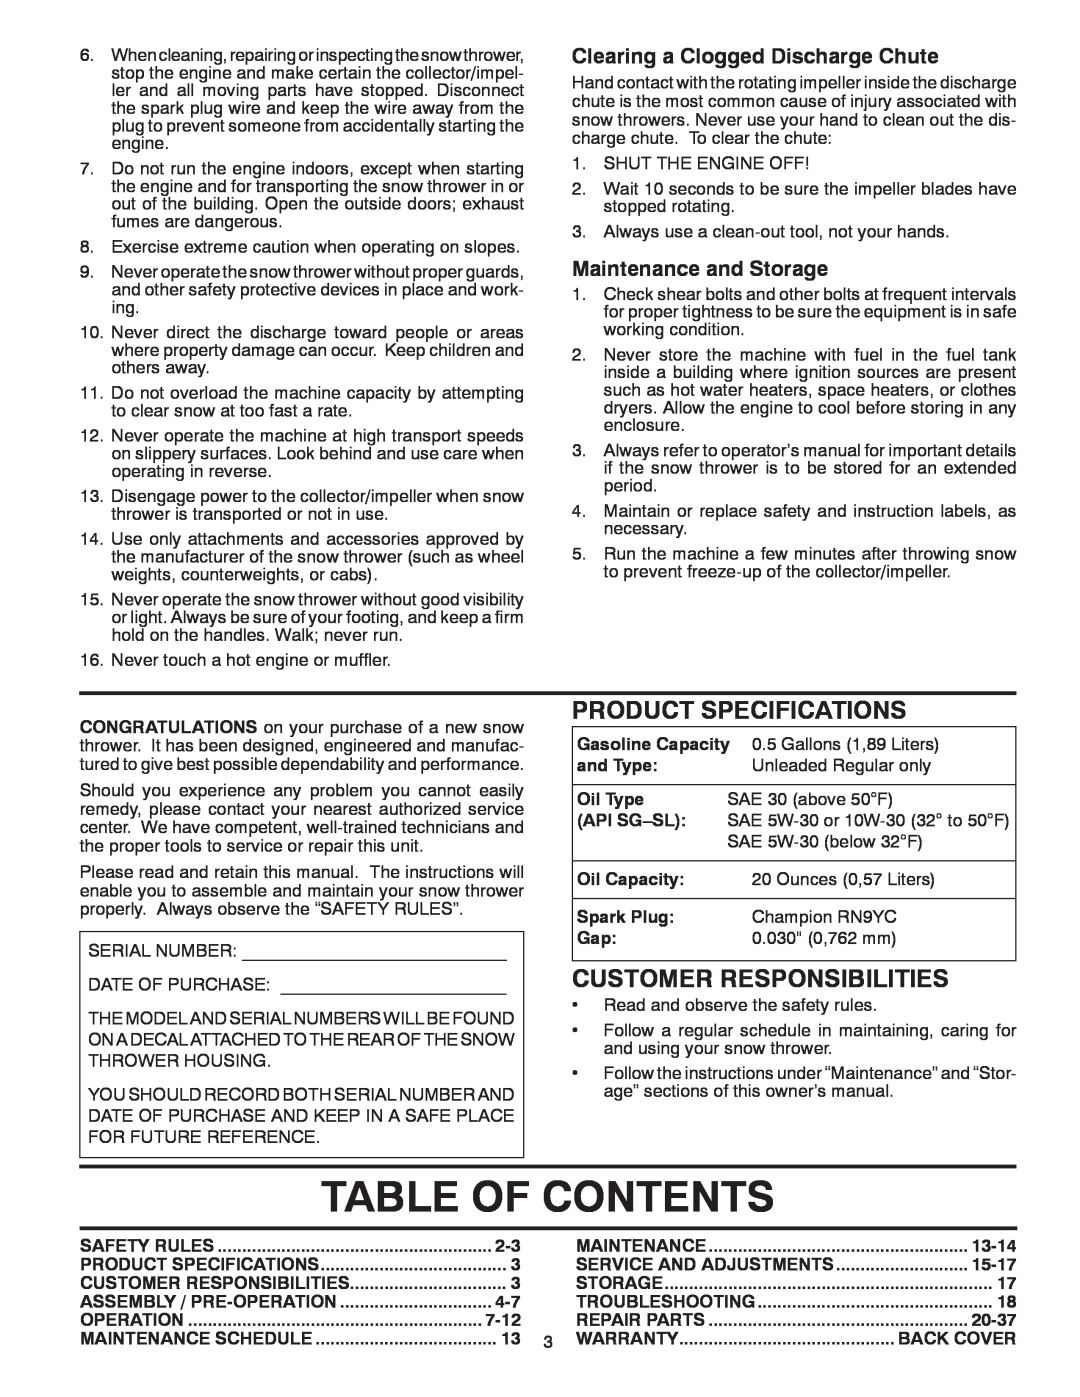 Poulan 421602 Table Of Contents, Product Specifications, Customer Responsibilities, Clearing a Clogged Discharge Chute 